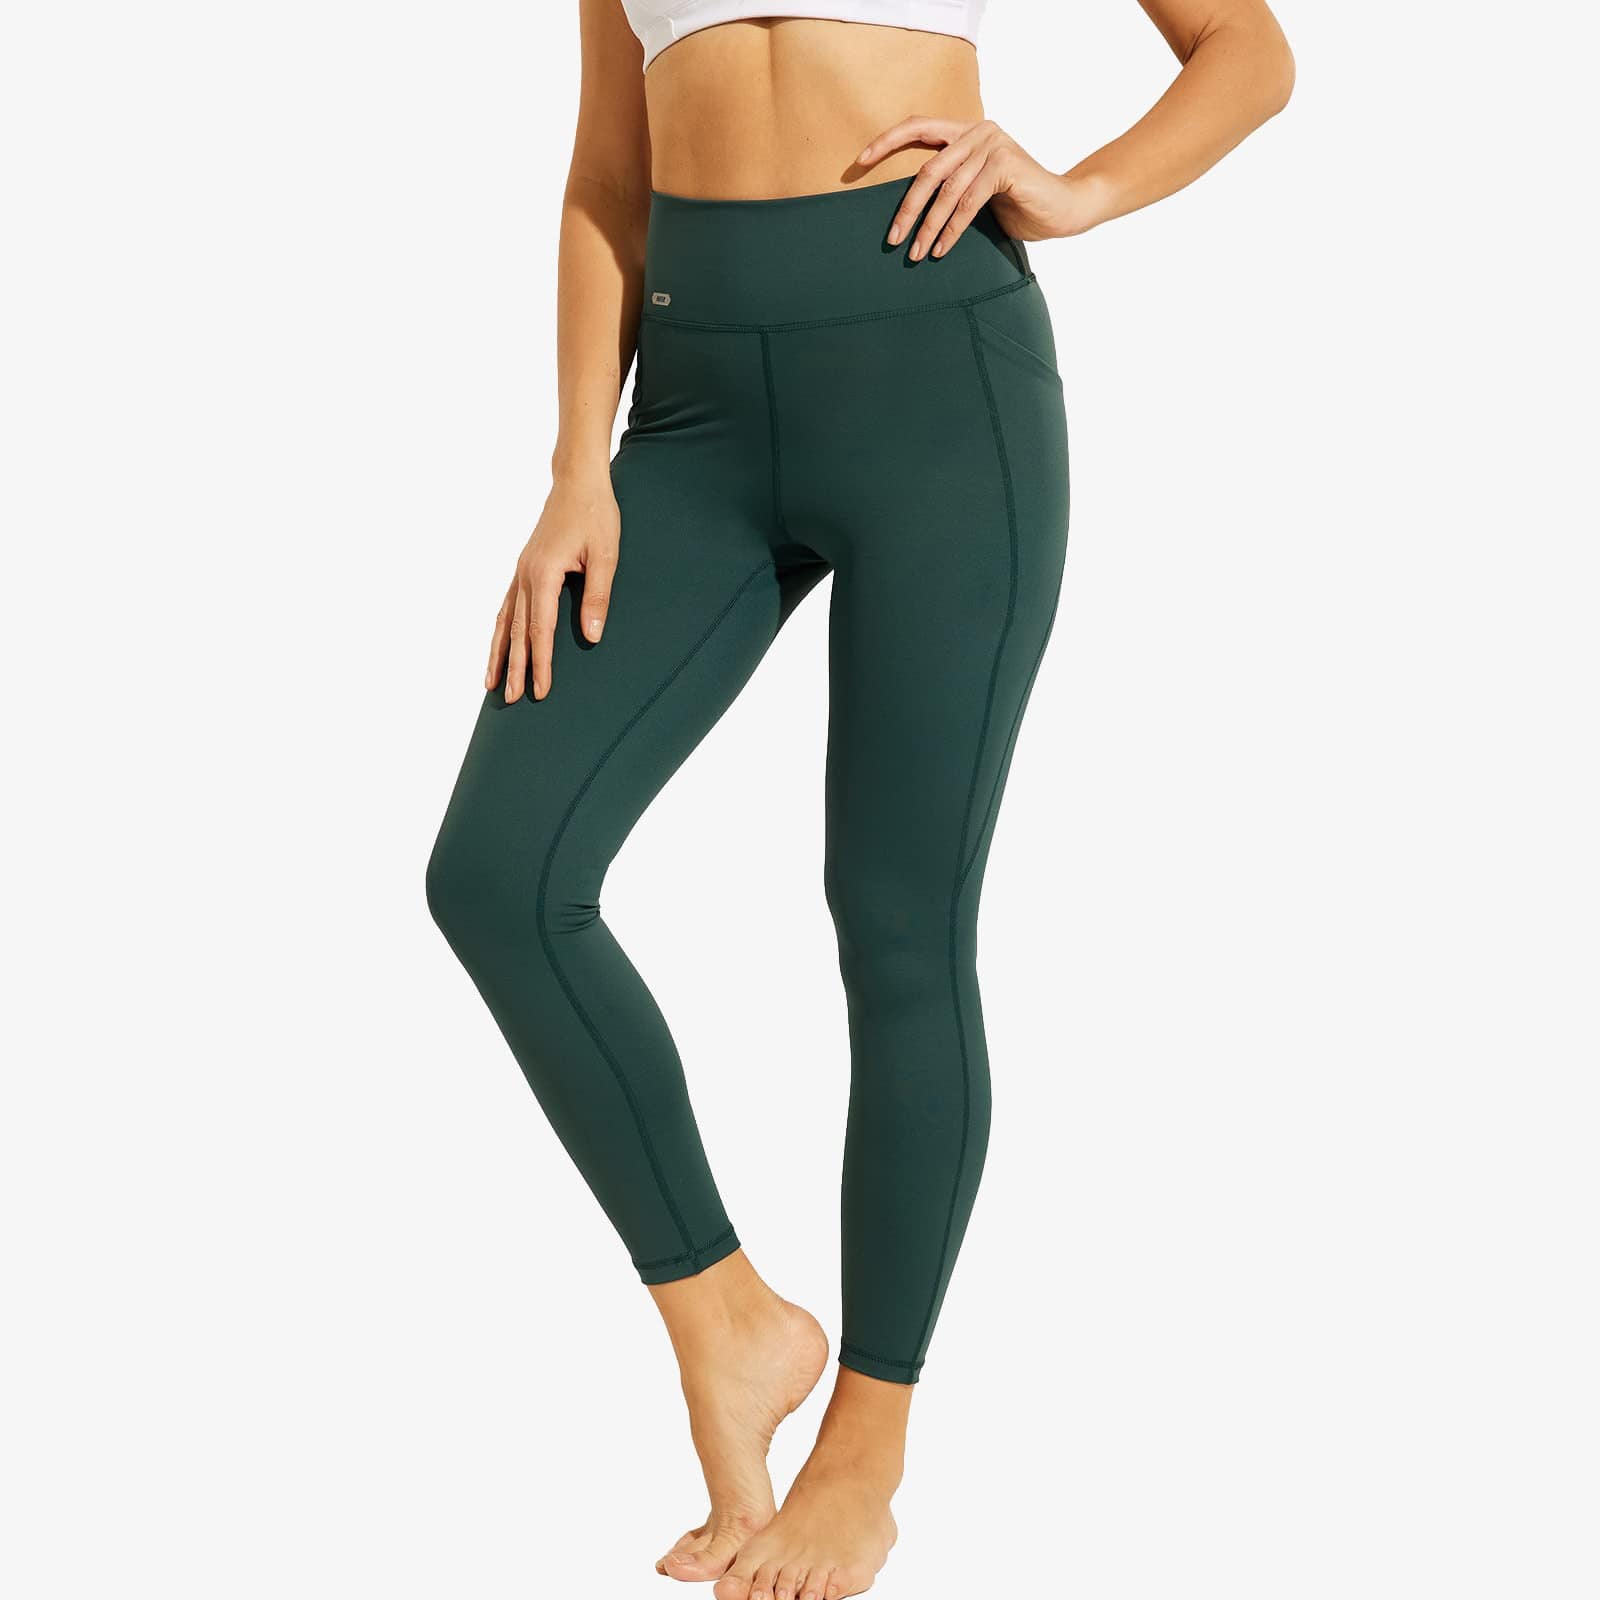 WHOUARE Women's Joggers Pants Workout Athletic Leggings with Pockets High  Waisted Gym Running Yoga Pants Army Green-XS : Clothing, Shoes & Jewelry 